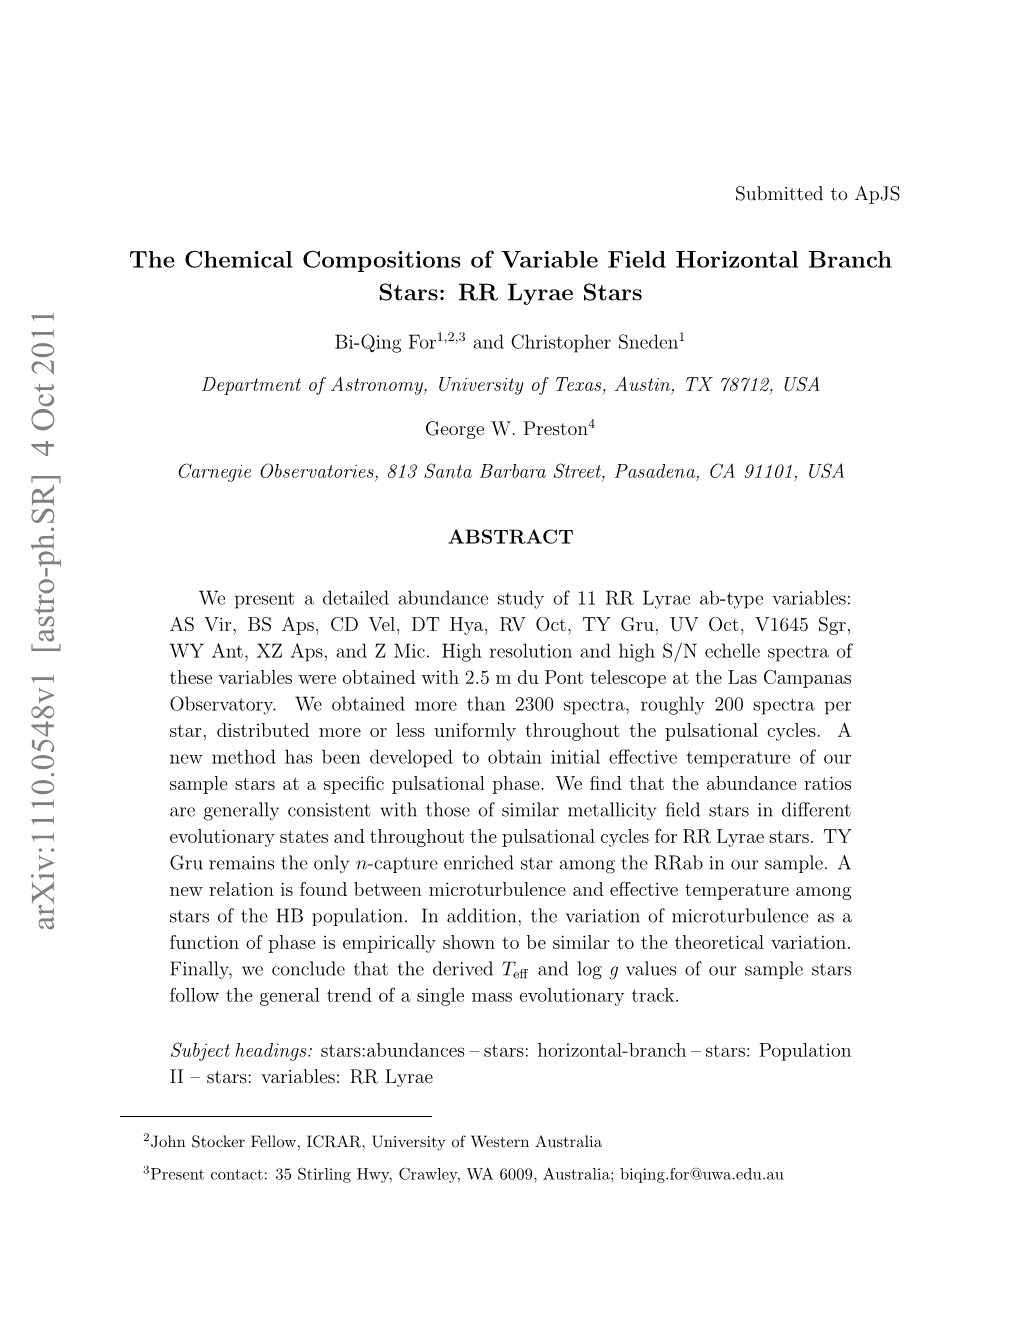 The Chemical Compositions of Variable Field Horizontal Branch